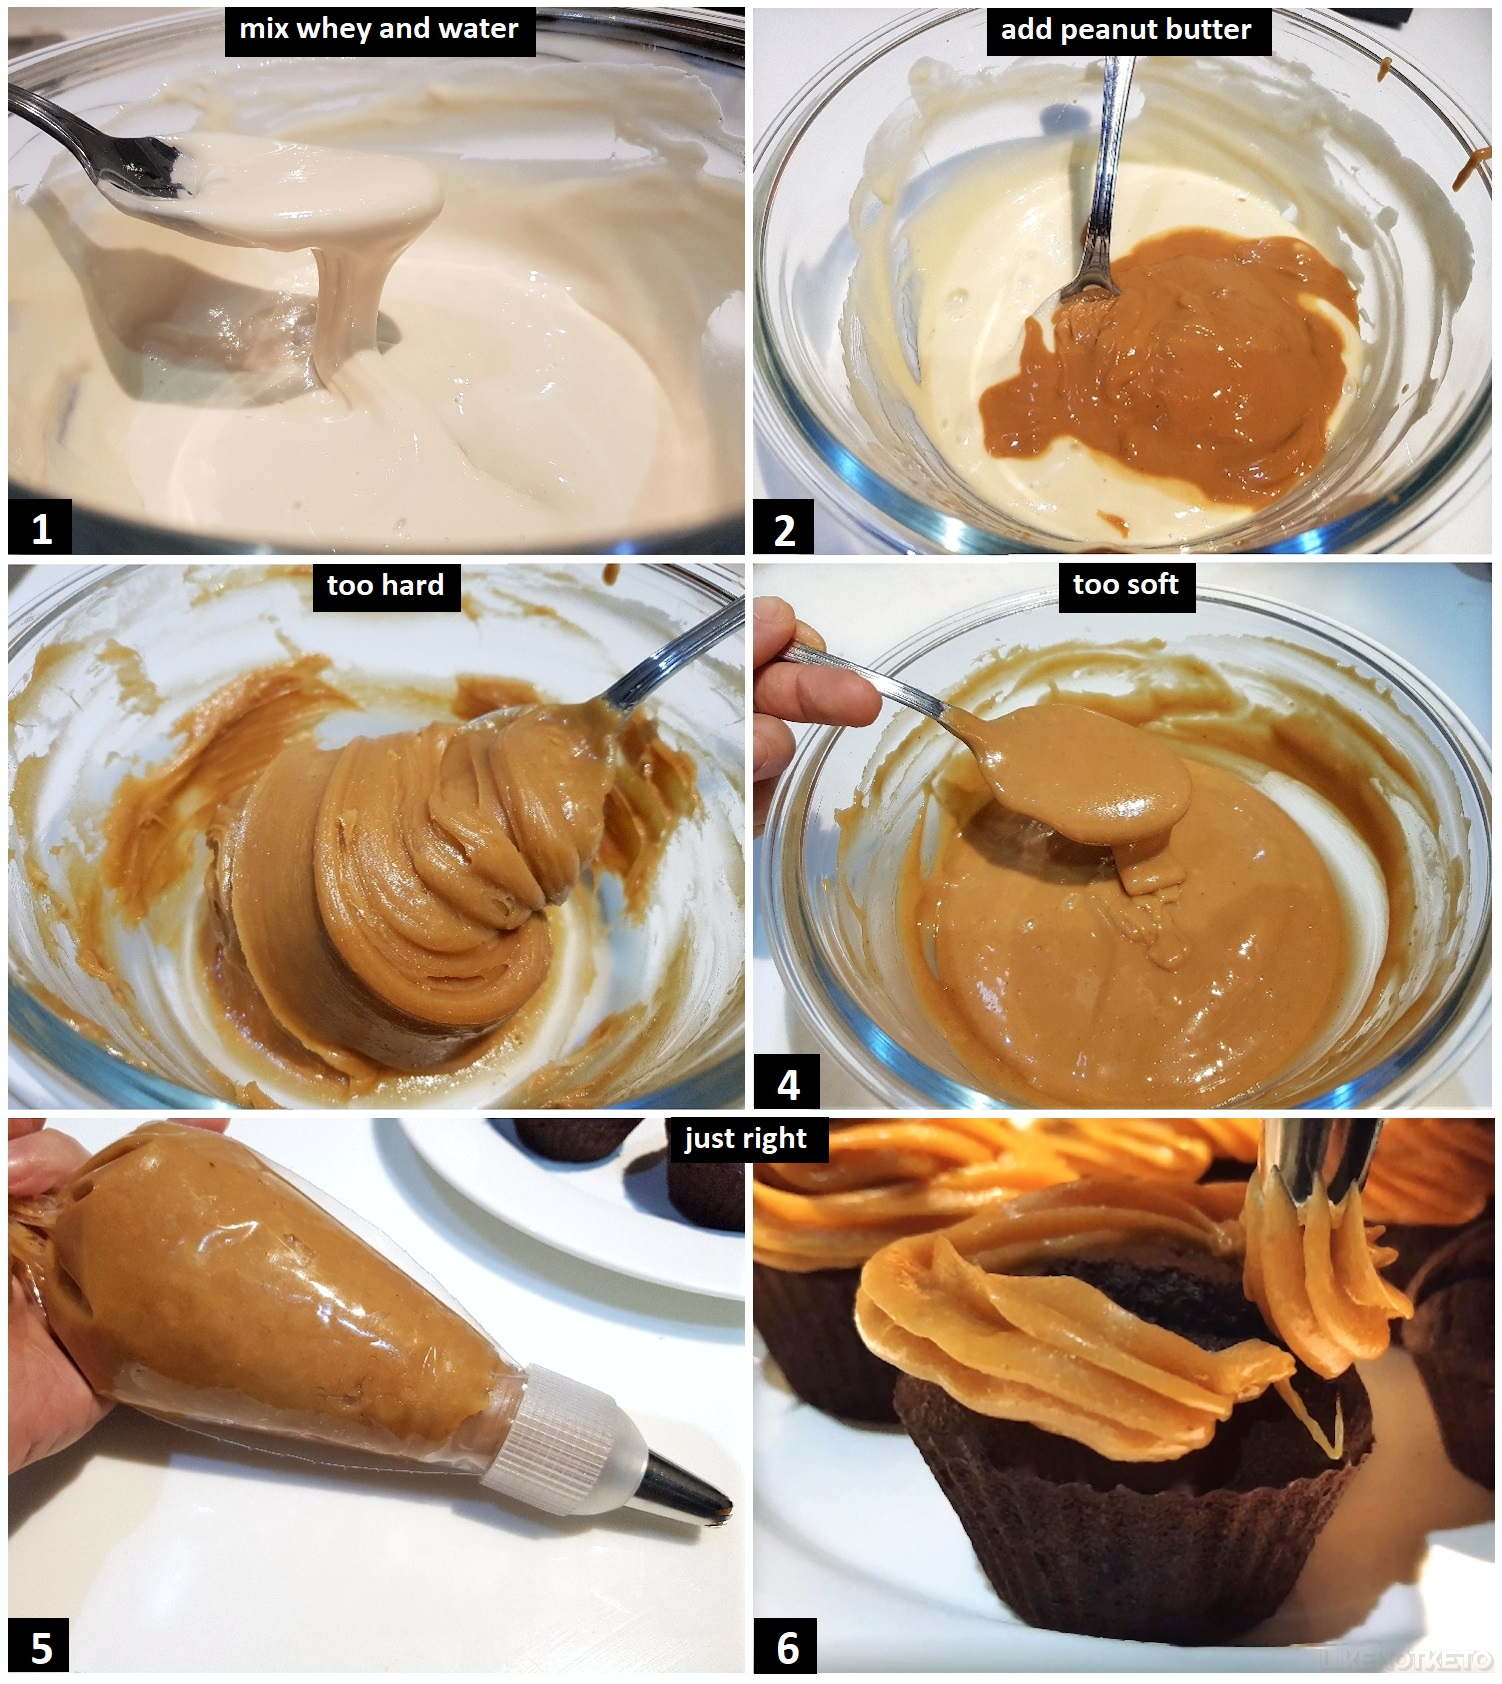 Step by step pictures for the peanut butter and whey protein keto cupcake frosting.